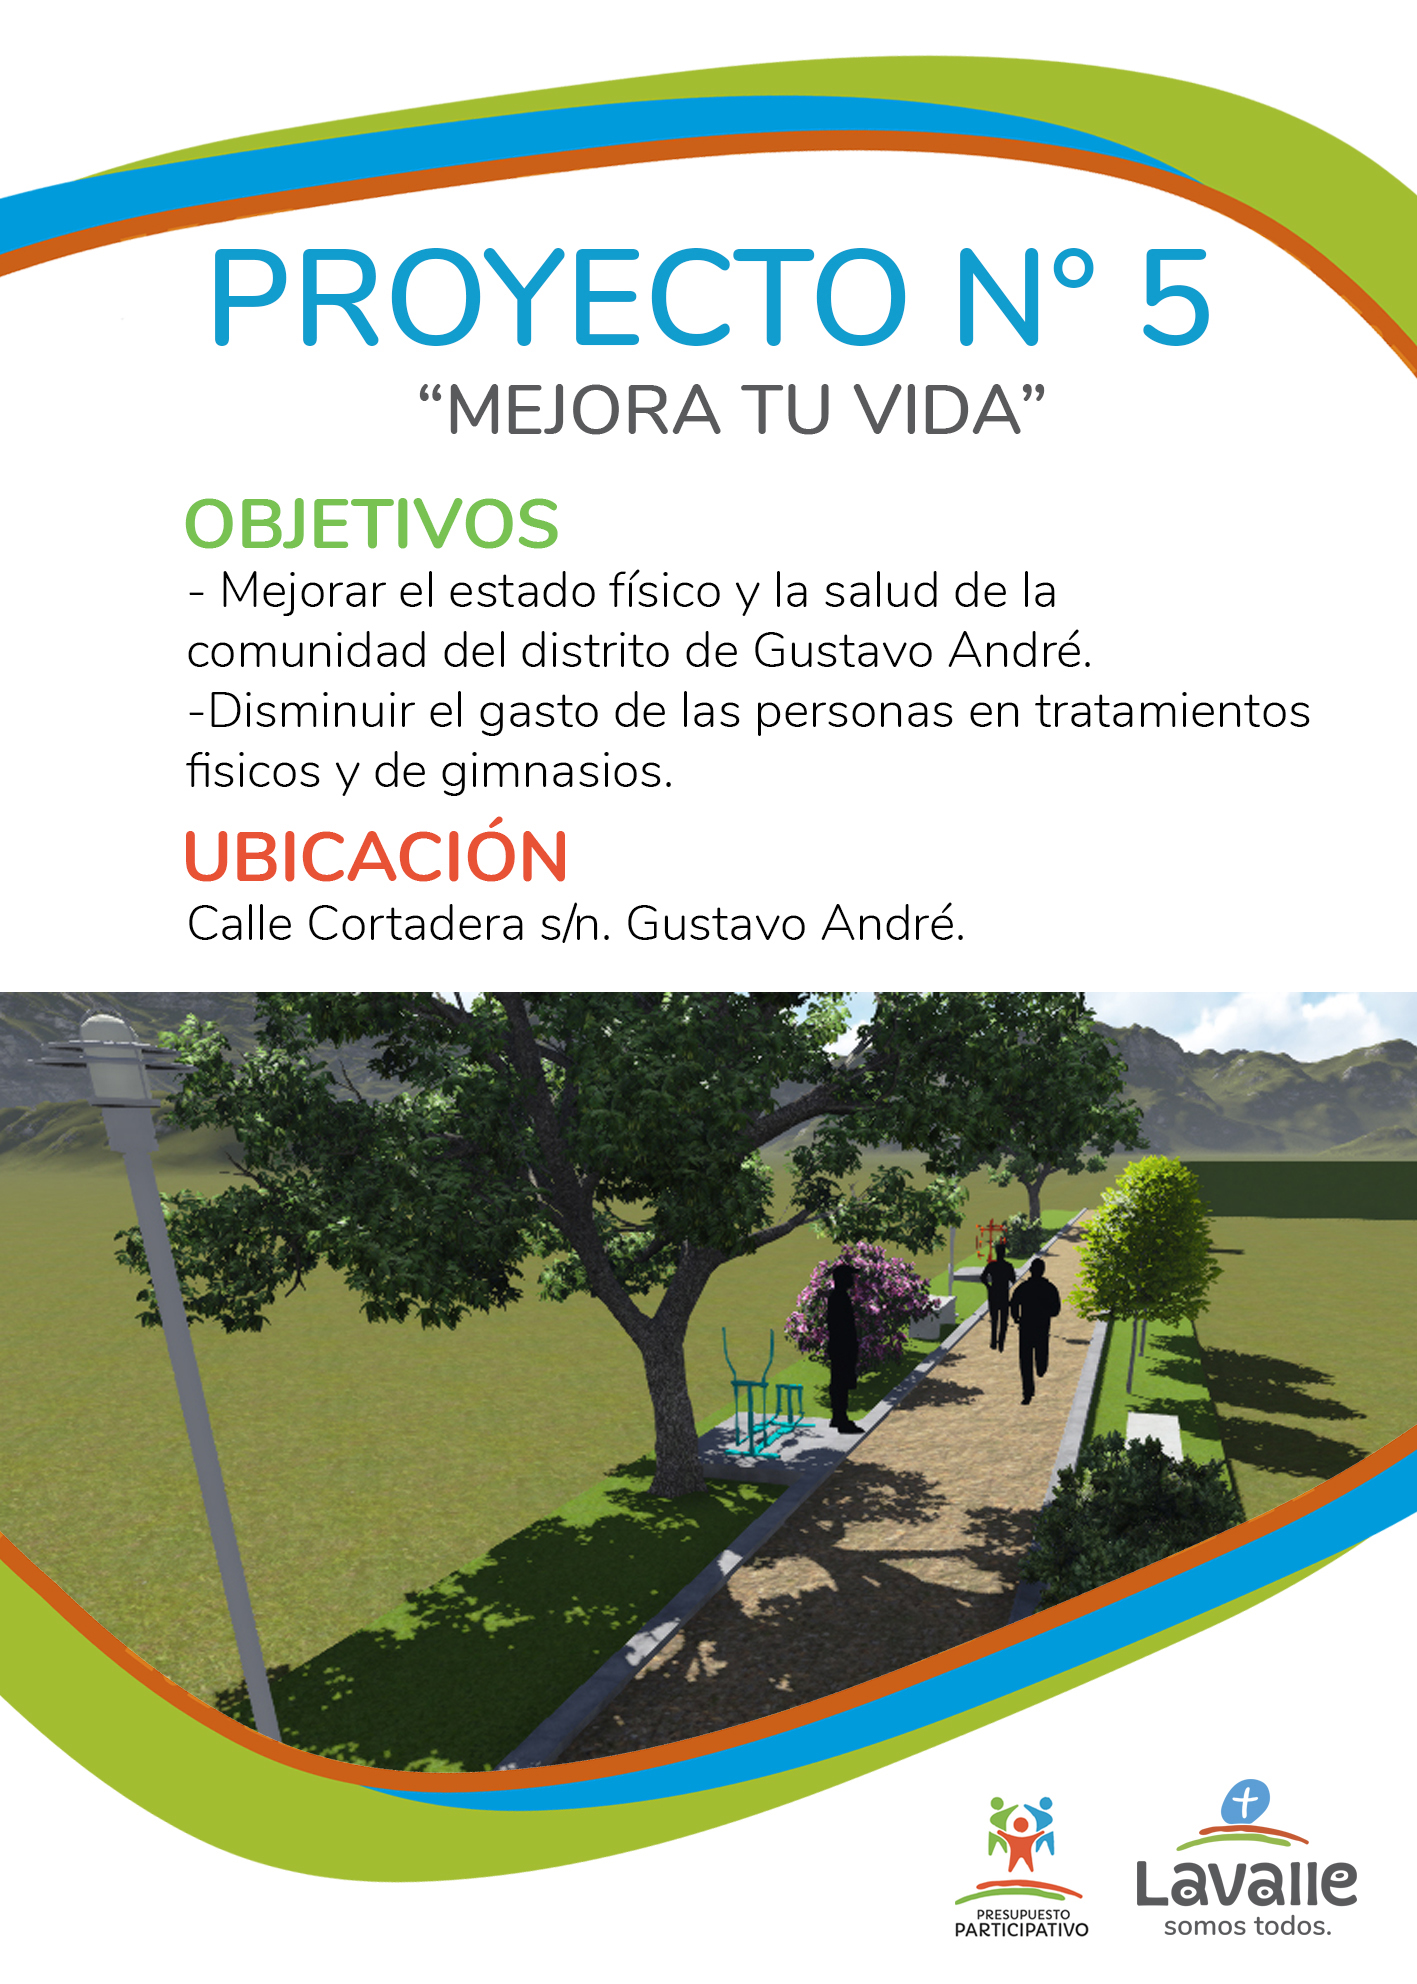 Proyecto 5 Gustavo Andre